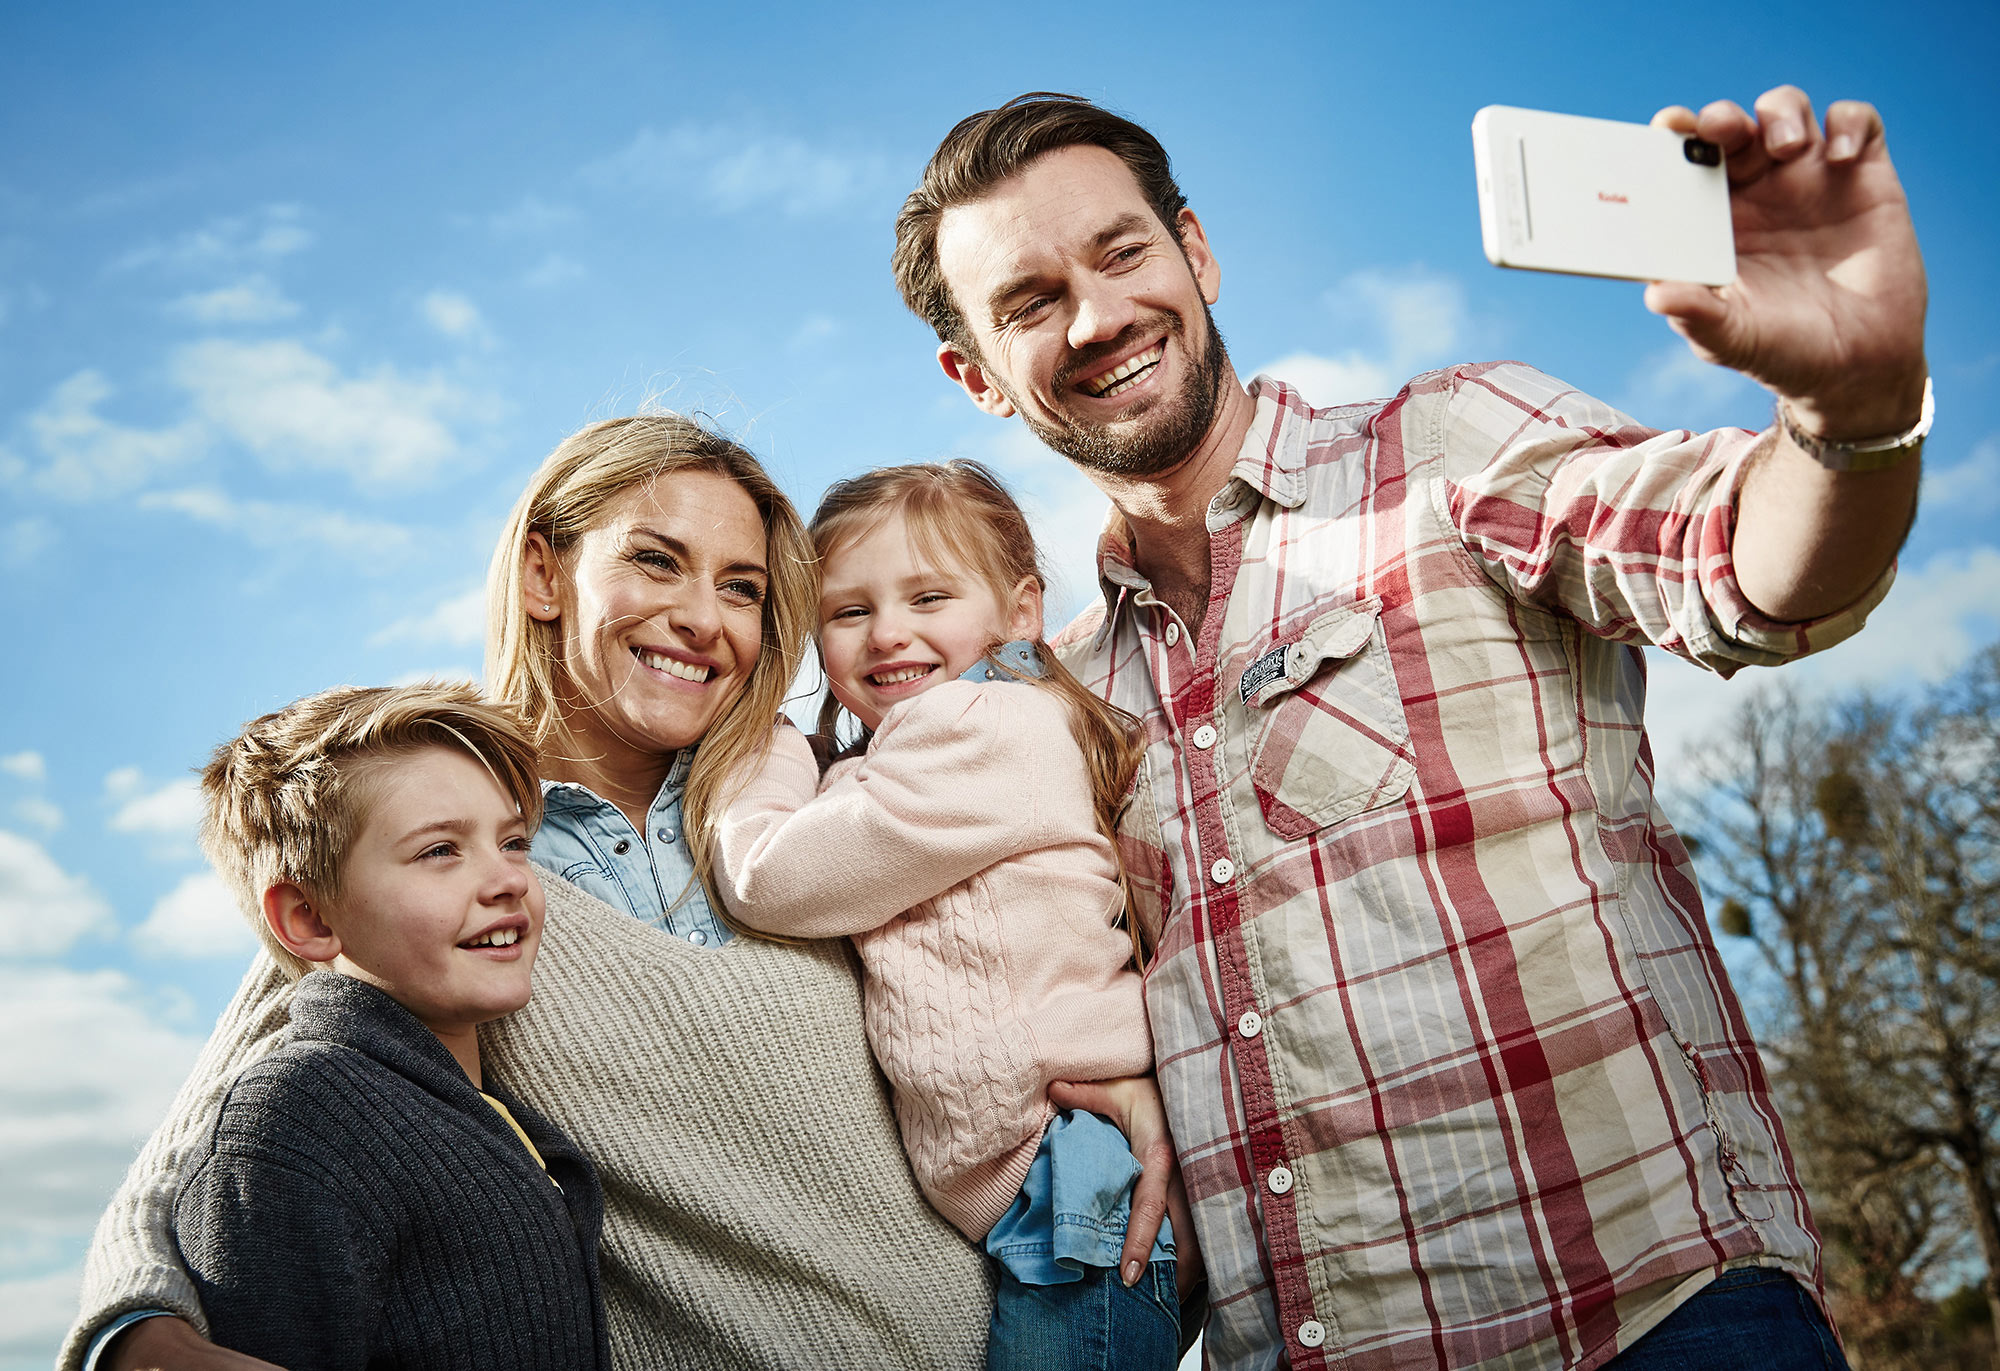 Lifestyle photographer, surrey, UK.  Family taking a selfie.  Photographed for mobile phone company in Sussex, UK